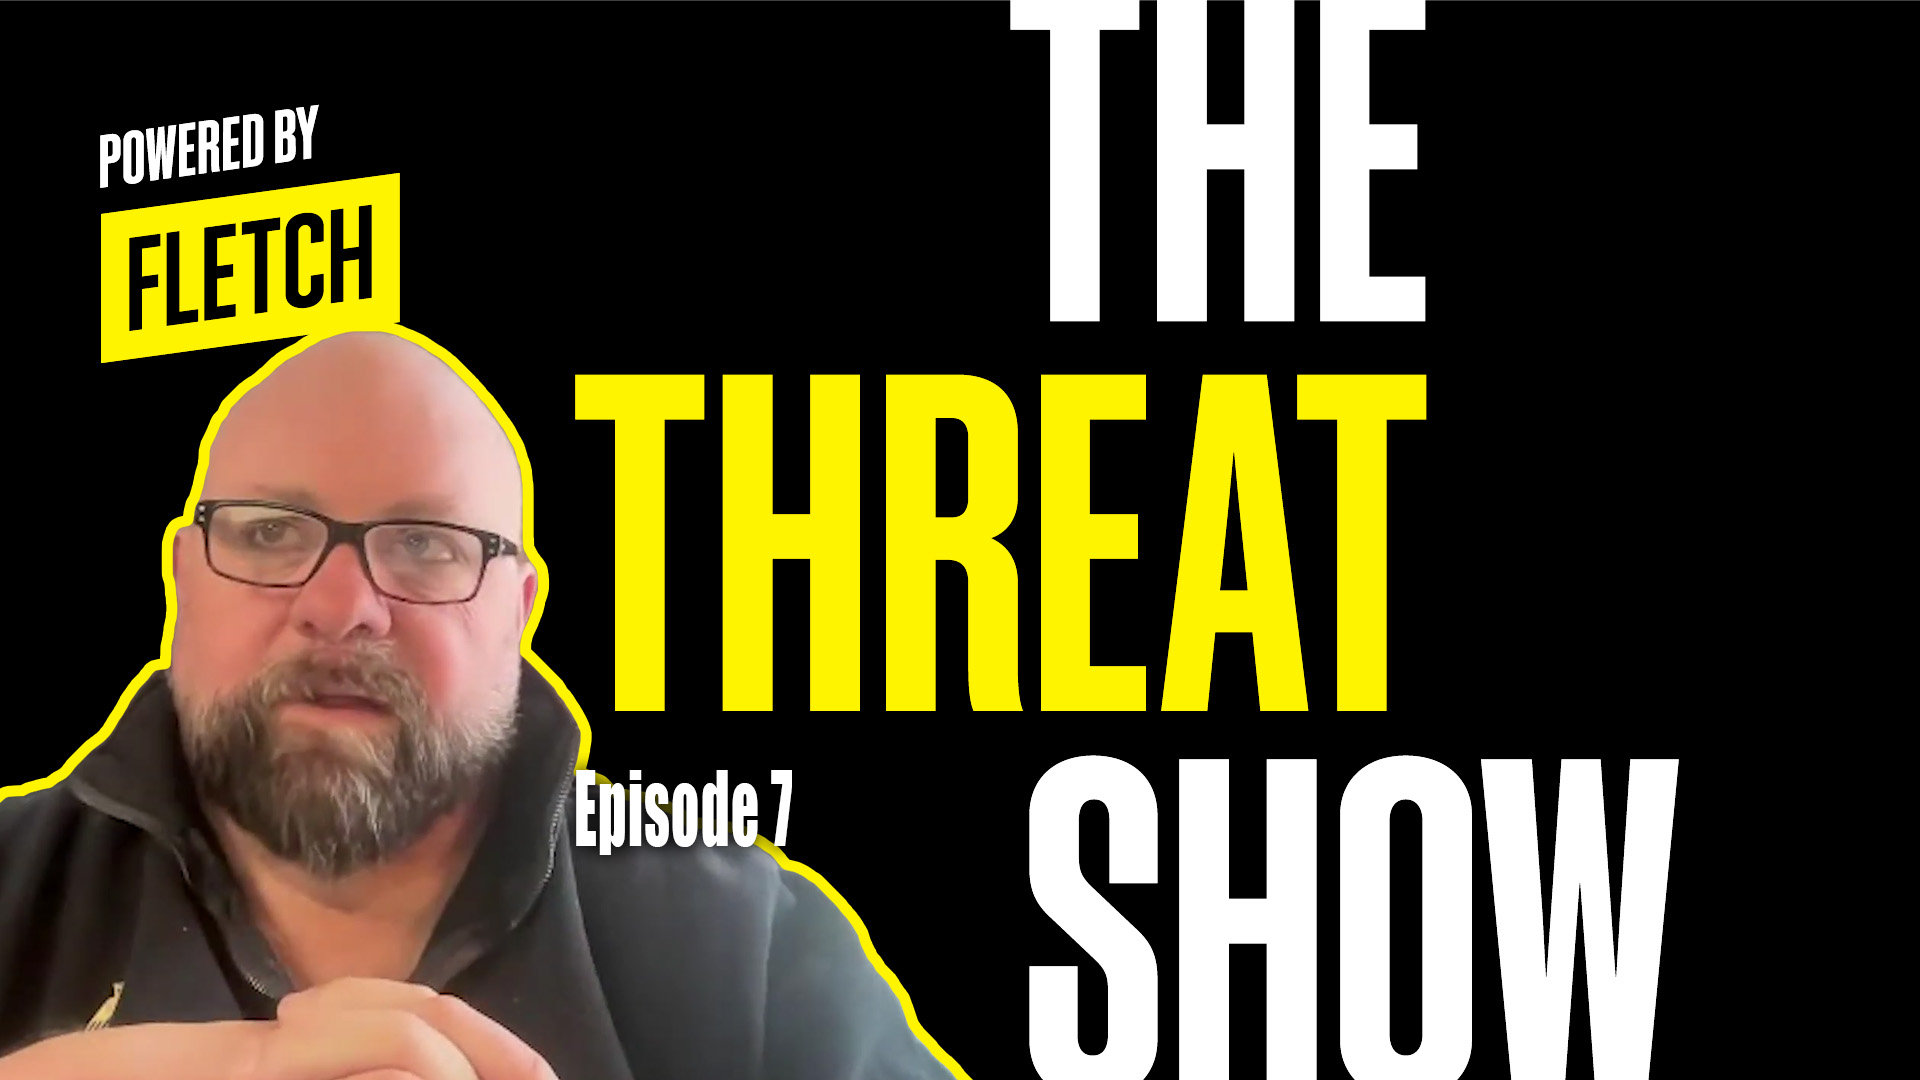 The Threat Show Ep. 7